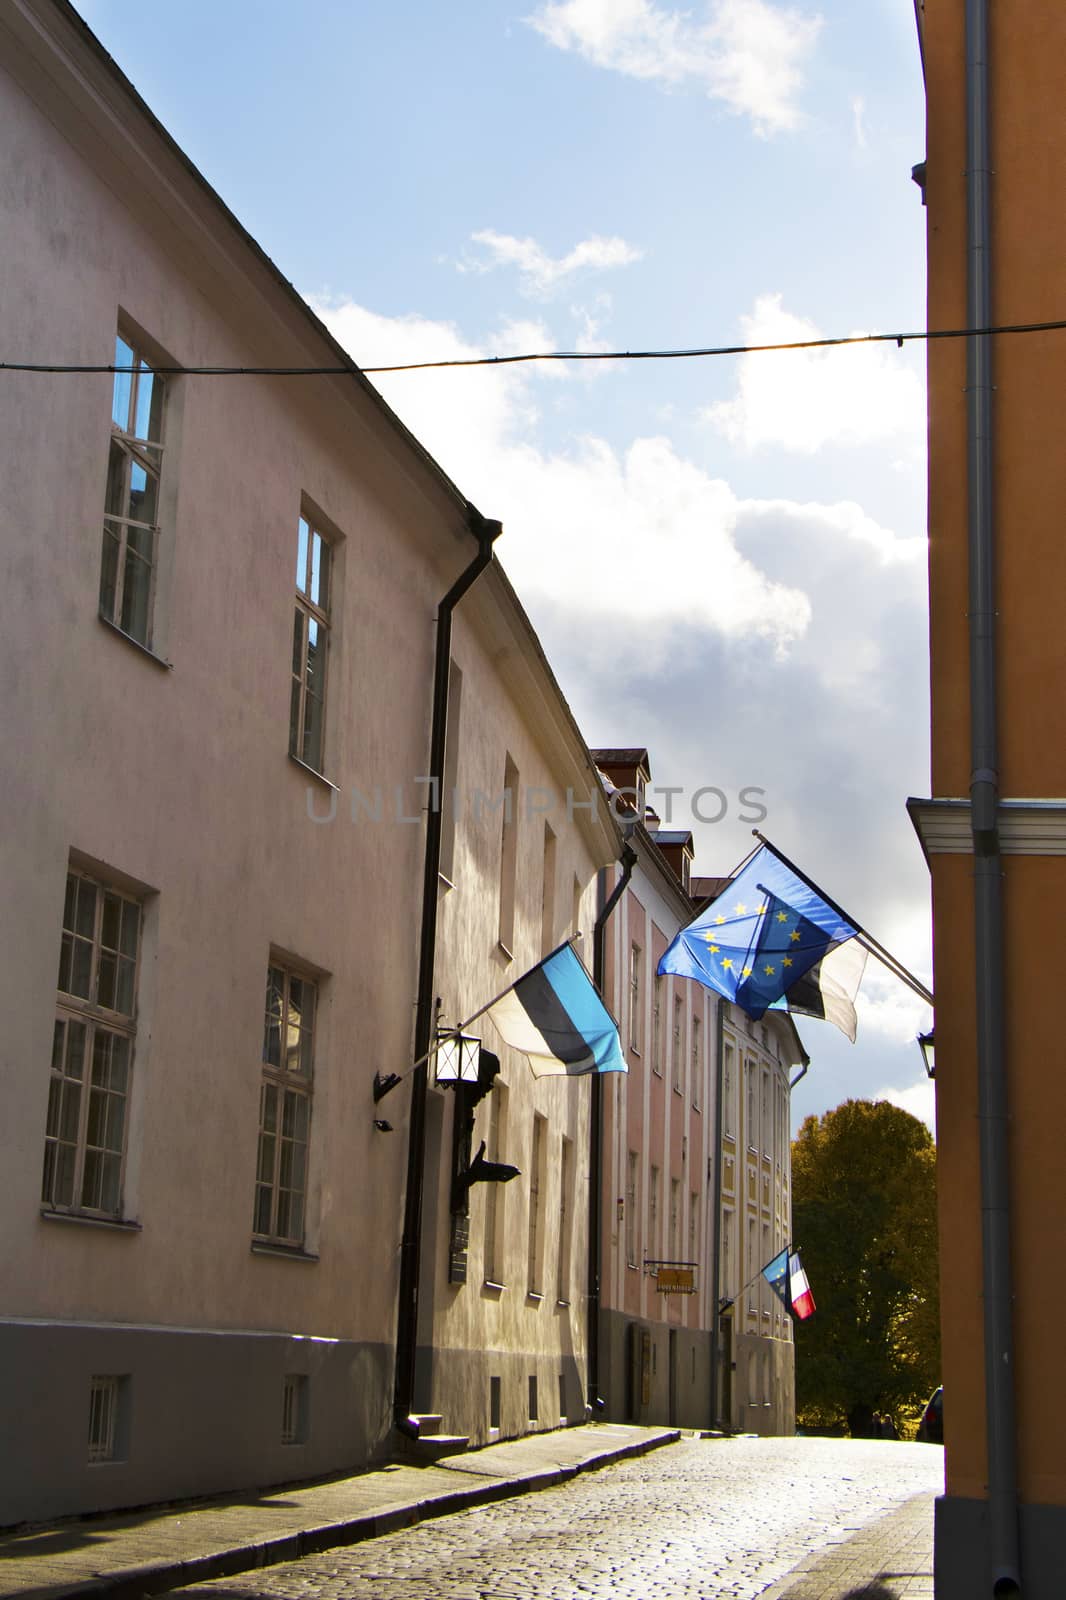 Buildings and architecture exterior view in old town of Tallinn, European union flag. by Taidundua